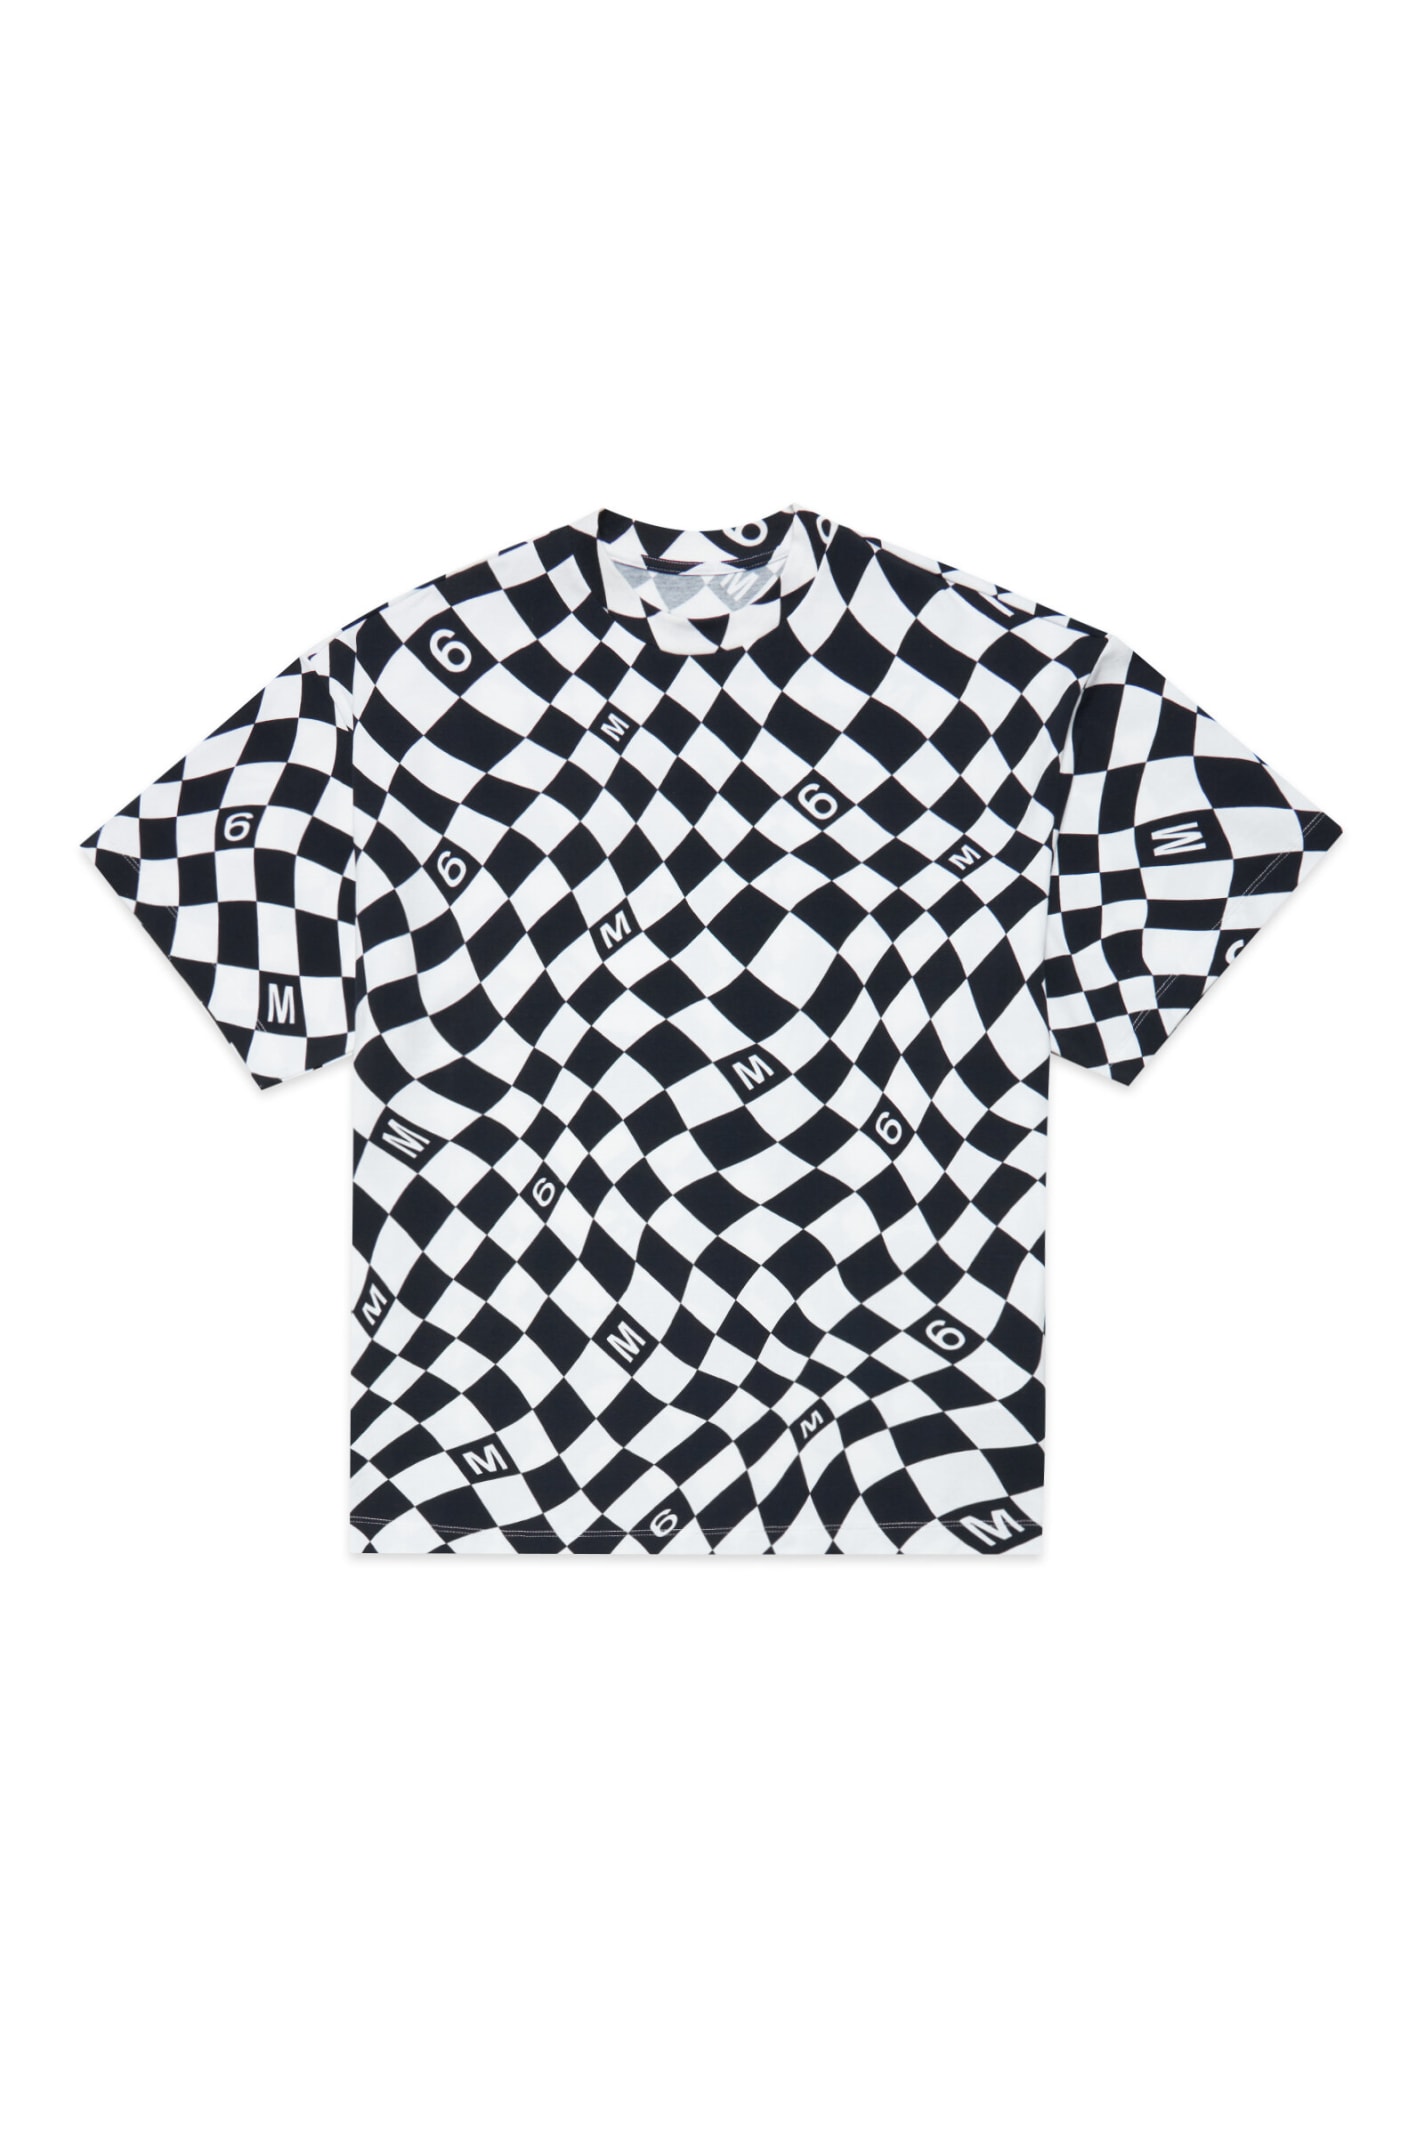 MM6 MAISON MARGIELA MM6MCU1U SW COVER-UPS MAISON MARGIELA MAXI T-SHIRT COVER-UP WITH BLACK AND WHITE CHEQUERED PATTERN